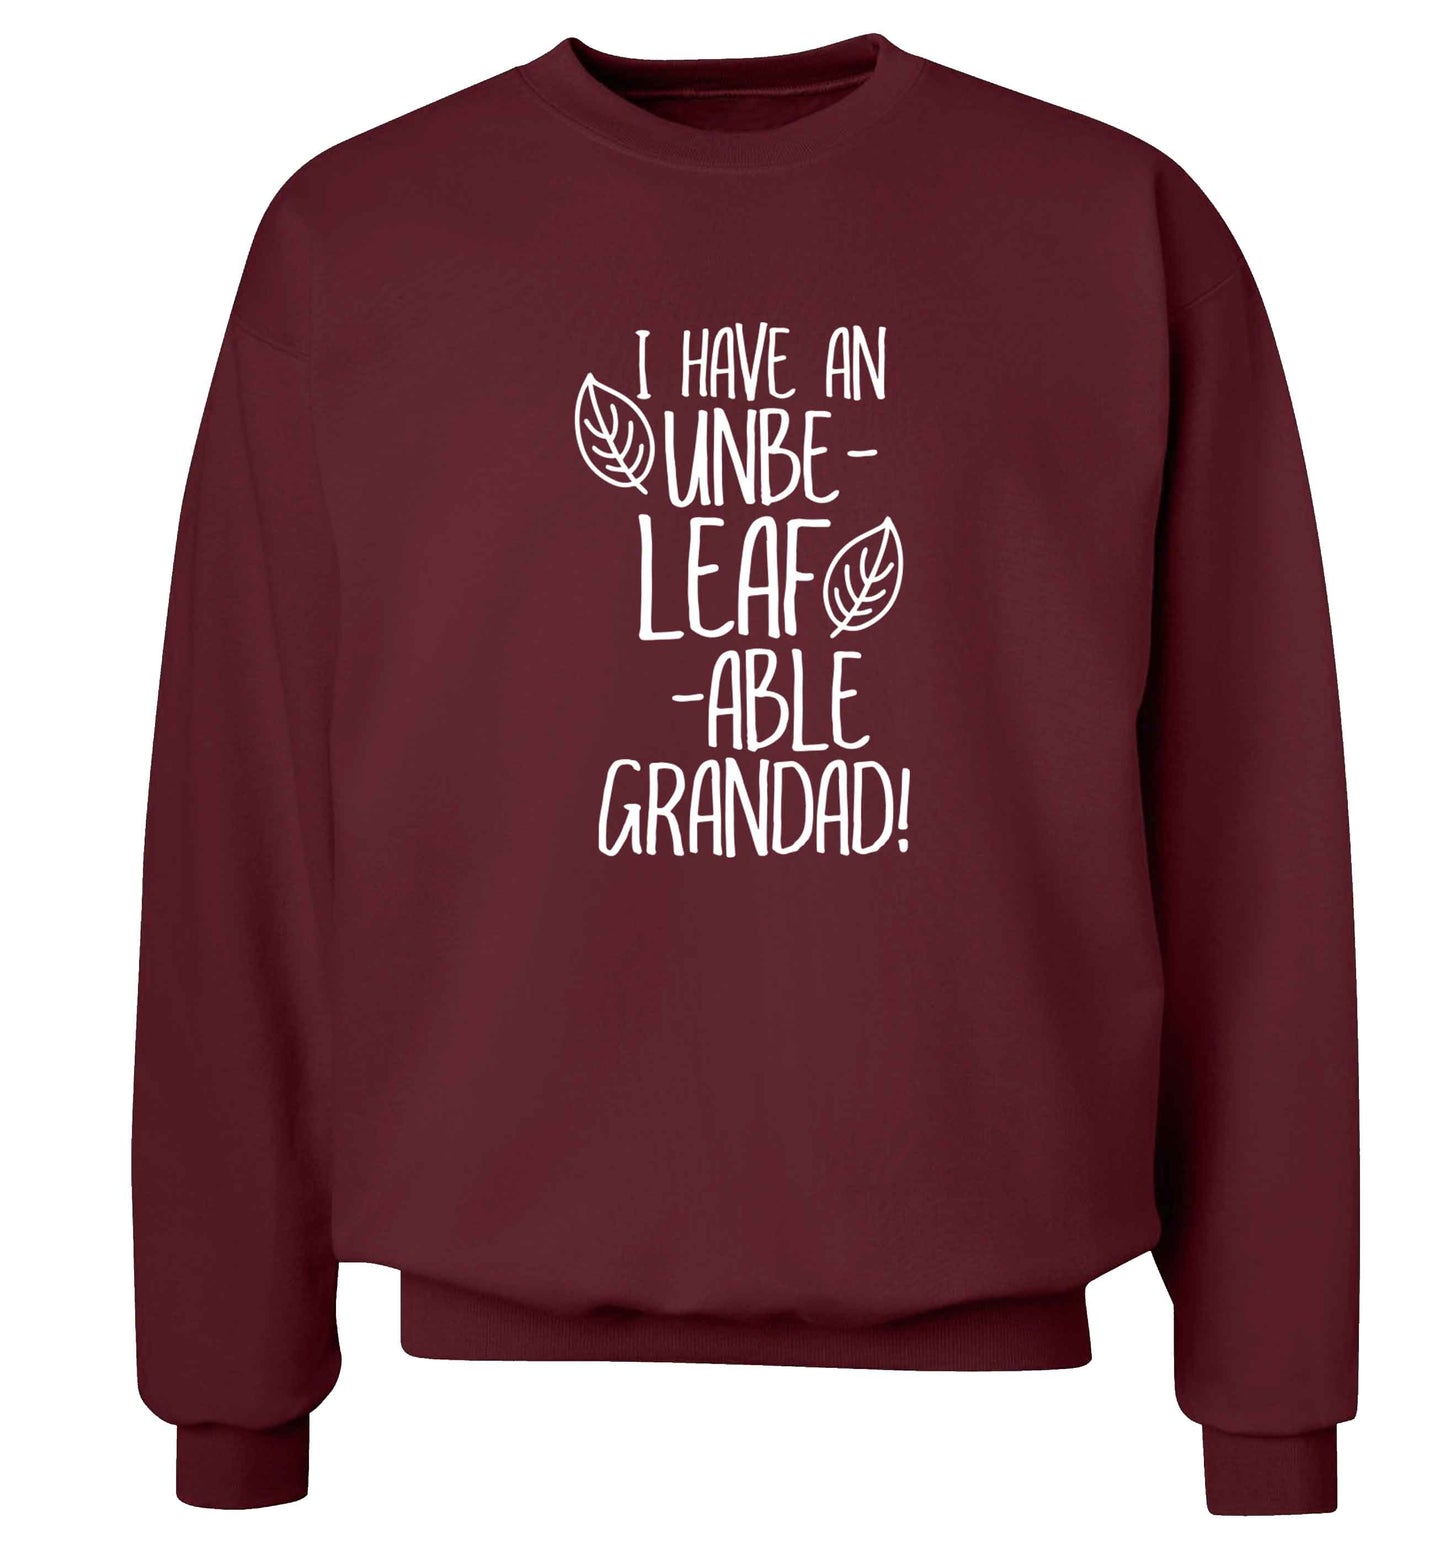 I have an unbe-leaf-able grandad Adult's unisex maroon Sweater 2XL